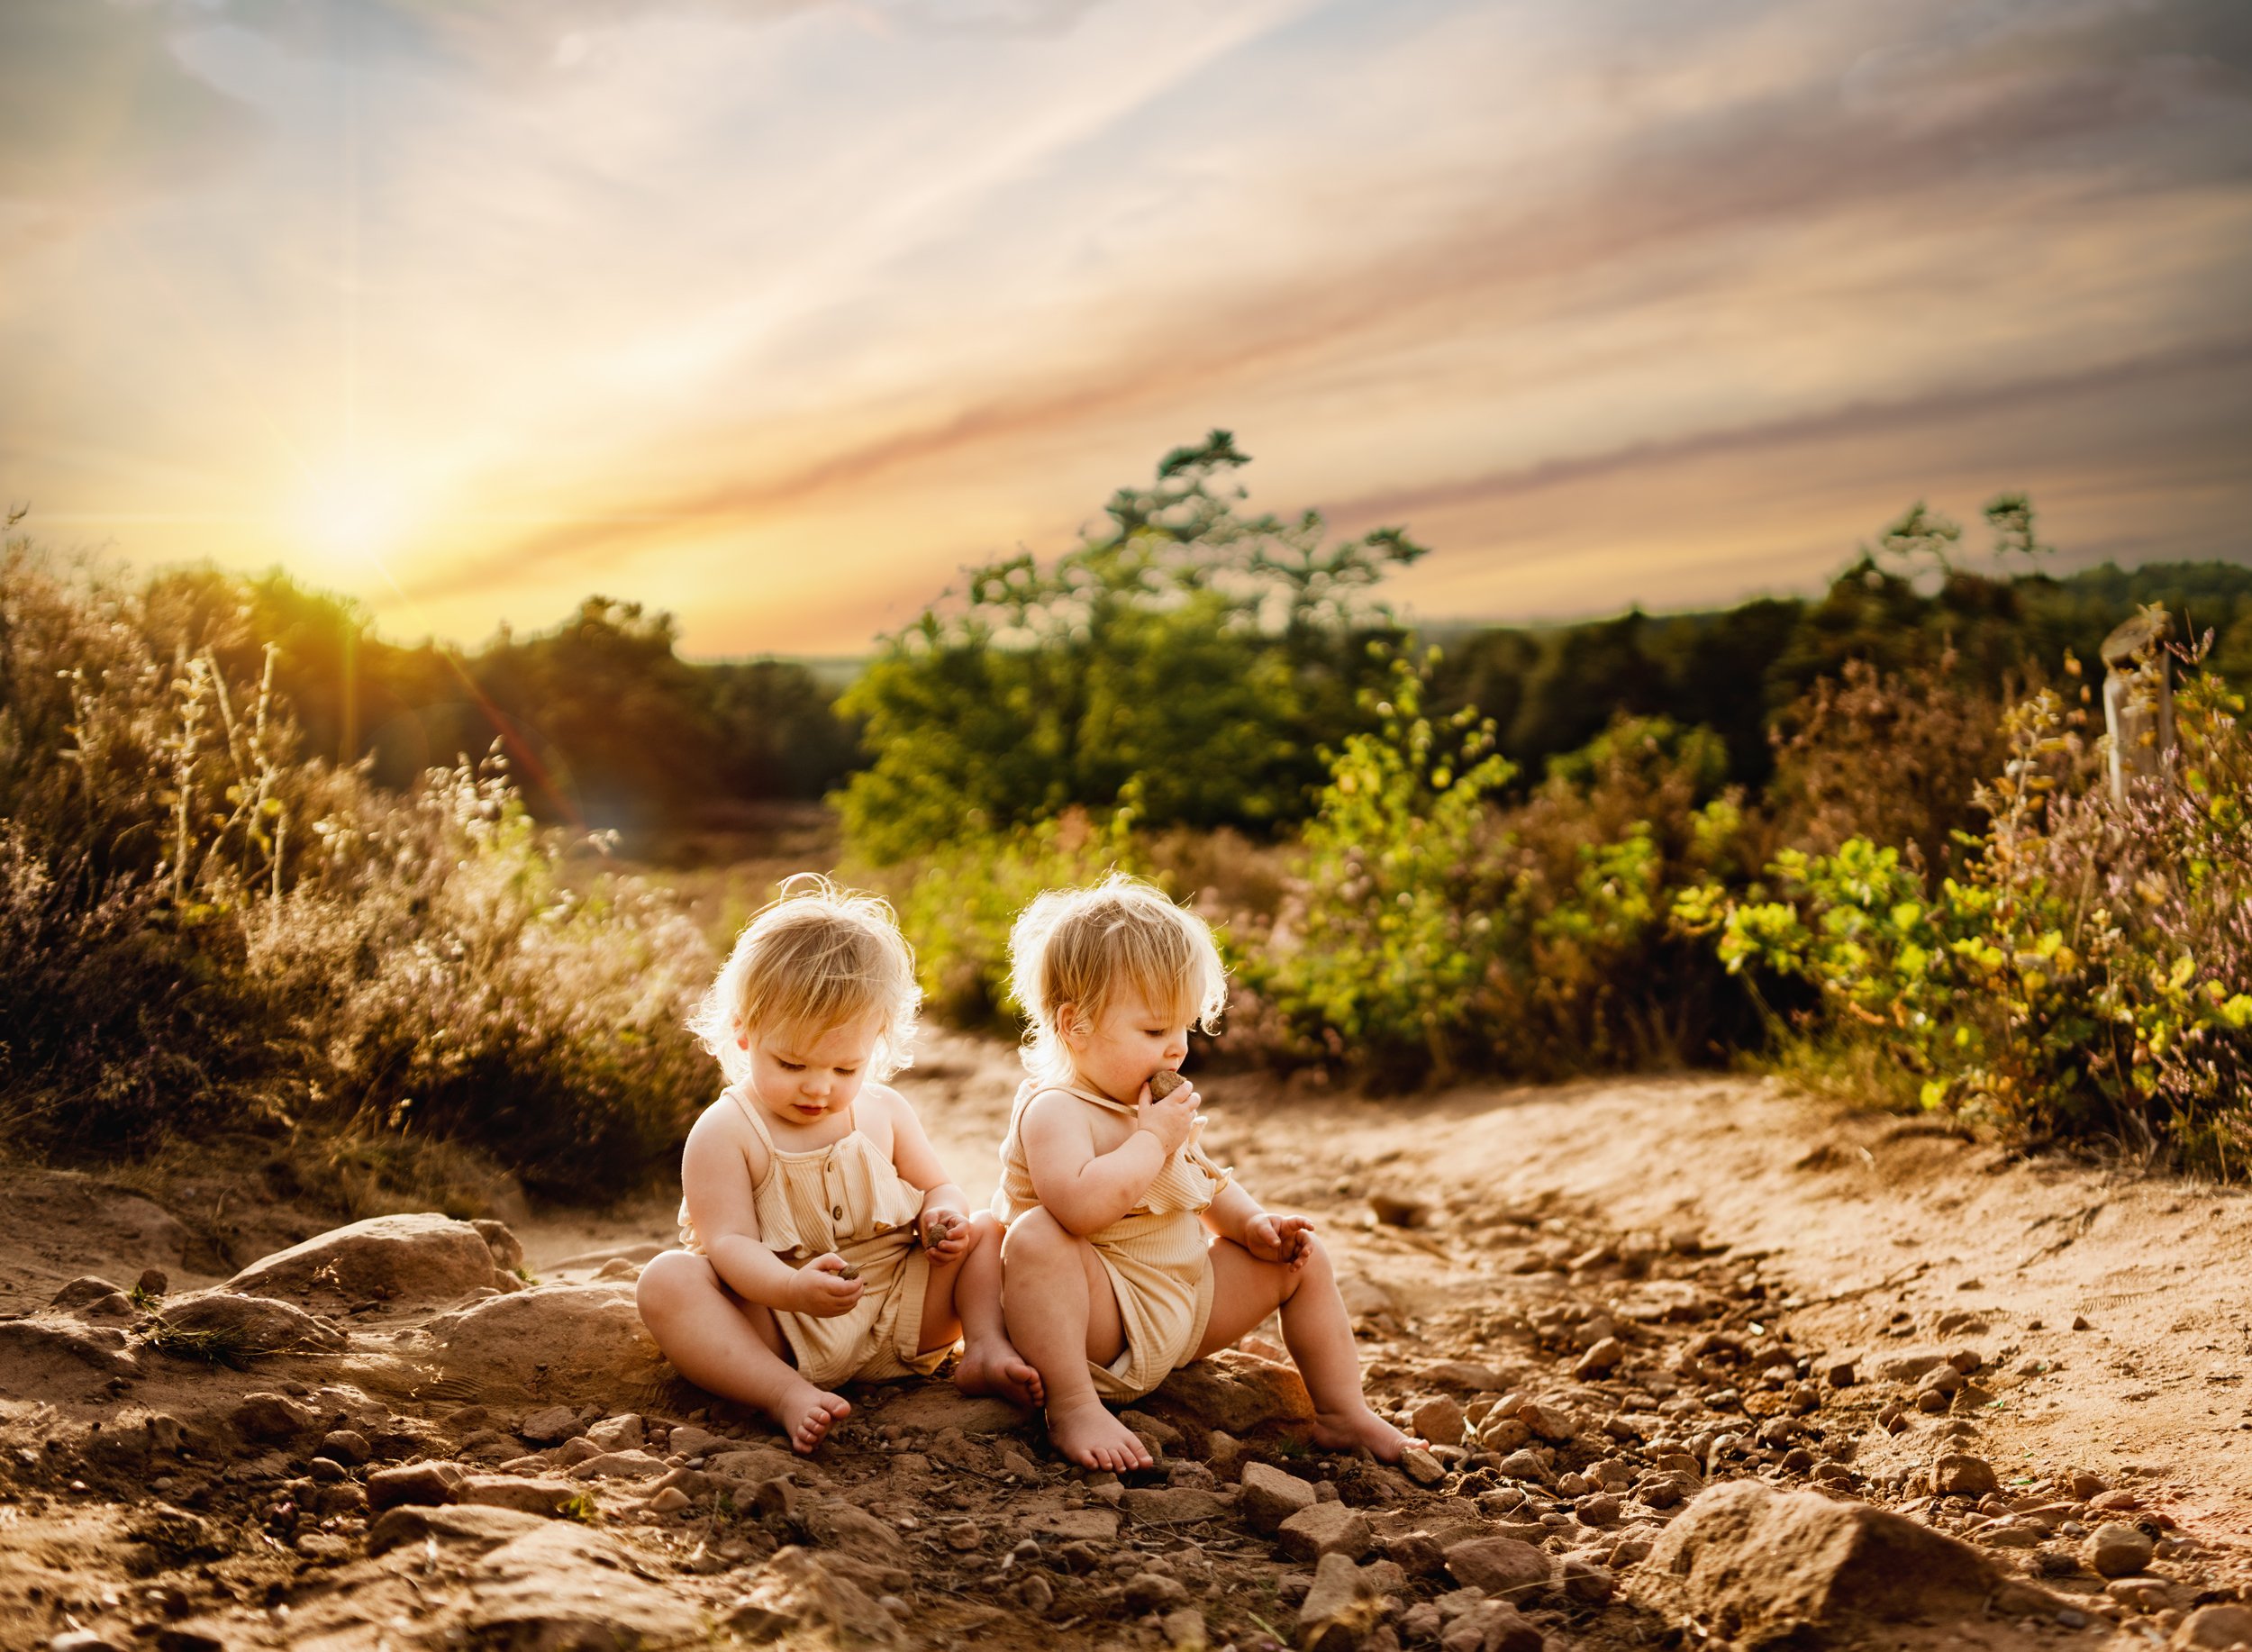 two-young-blonde-twin-babies-in-cute-overalls-playing-in-sandy-dirt-at-mehlinger-heide-at-sunset-by-family-photographer-sarah-havens-ramstein-kmc-germany.jpg